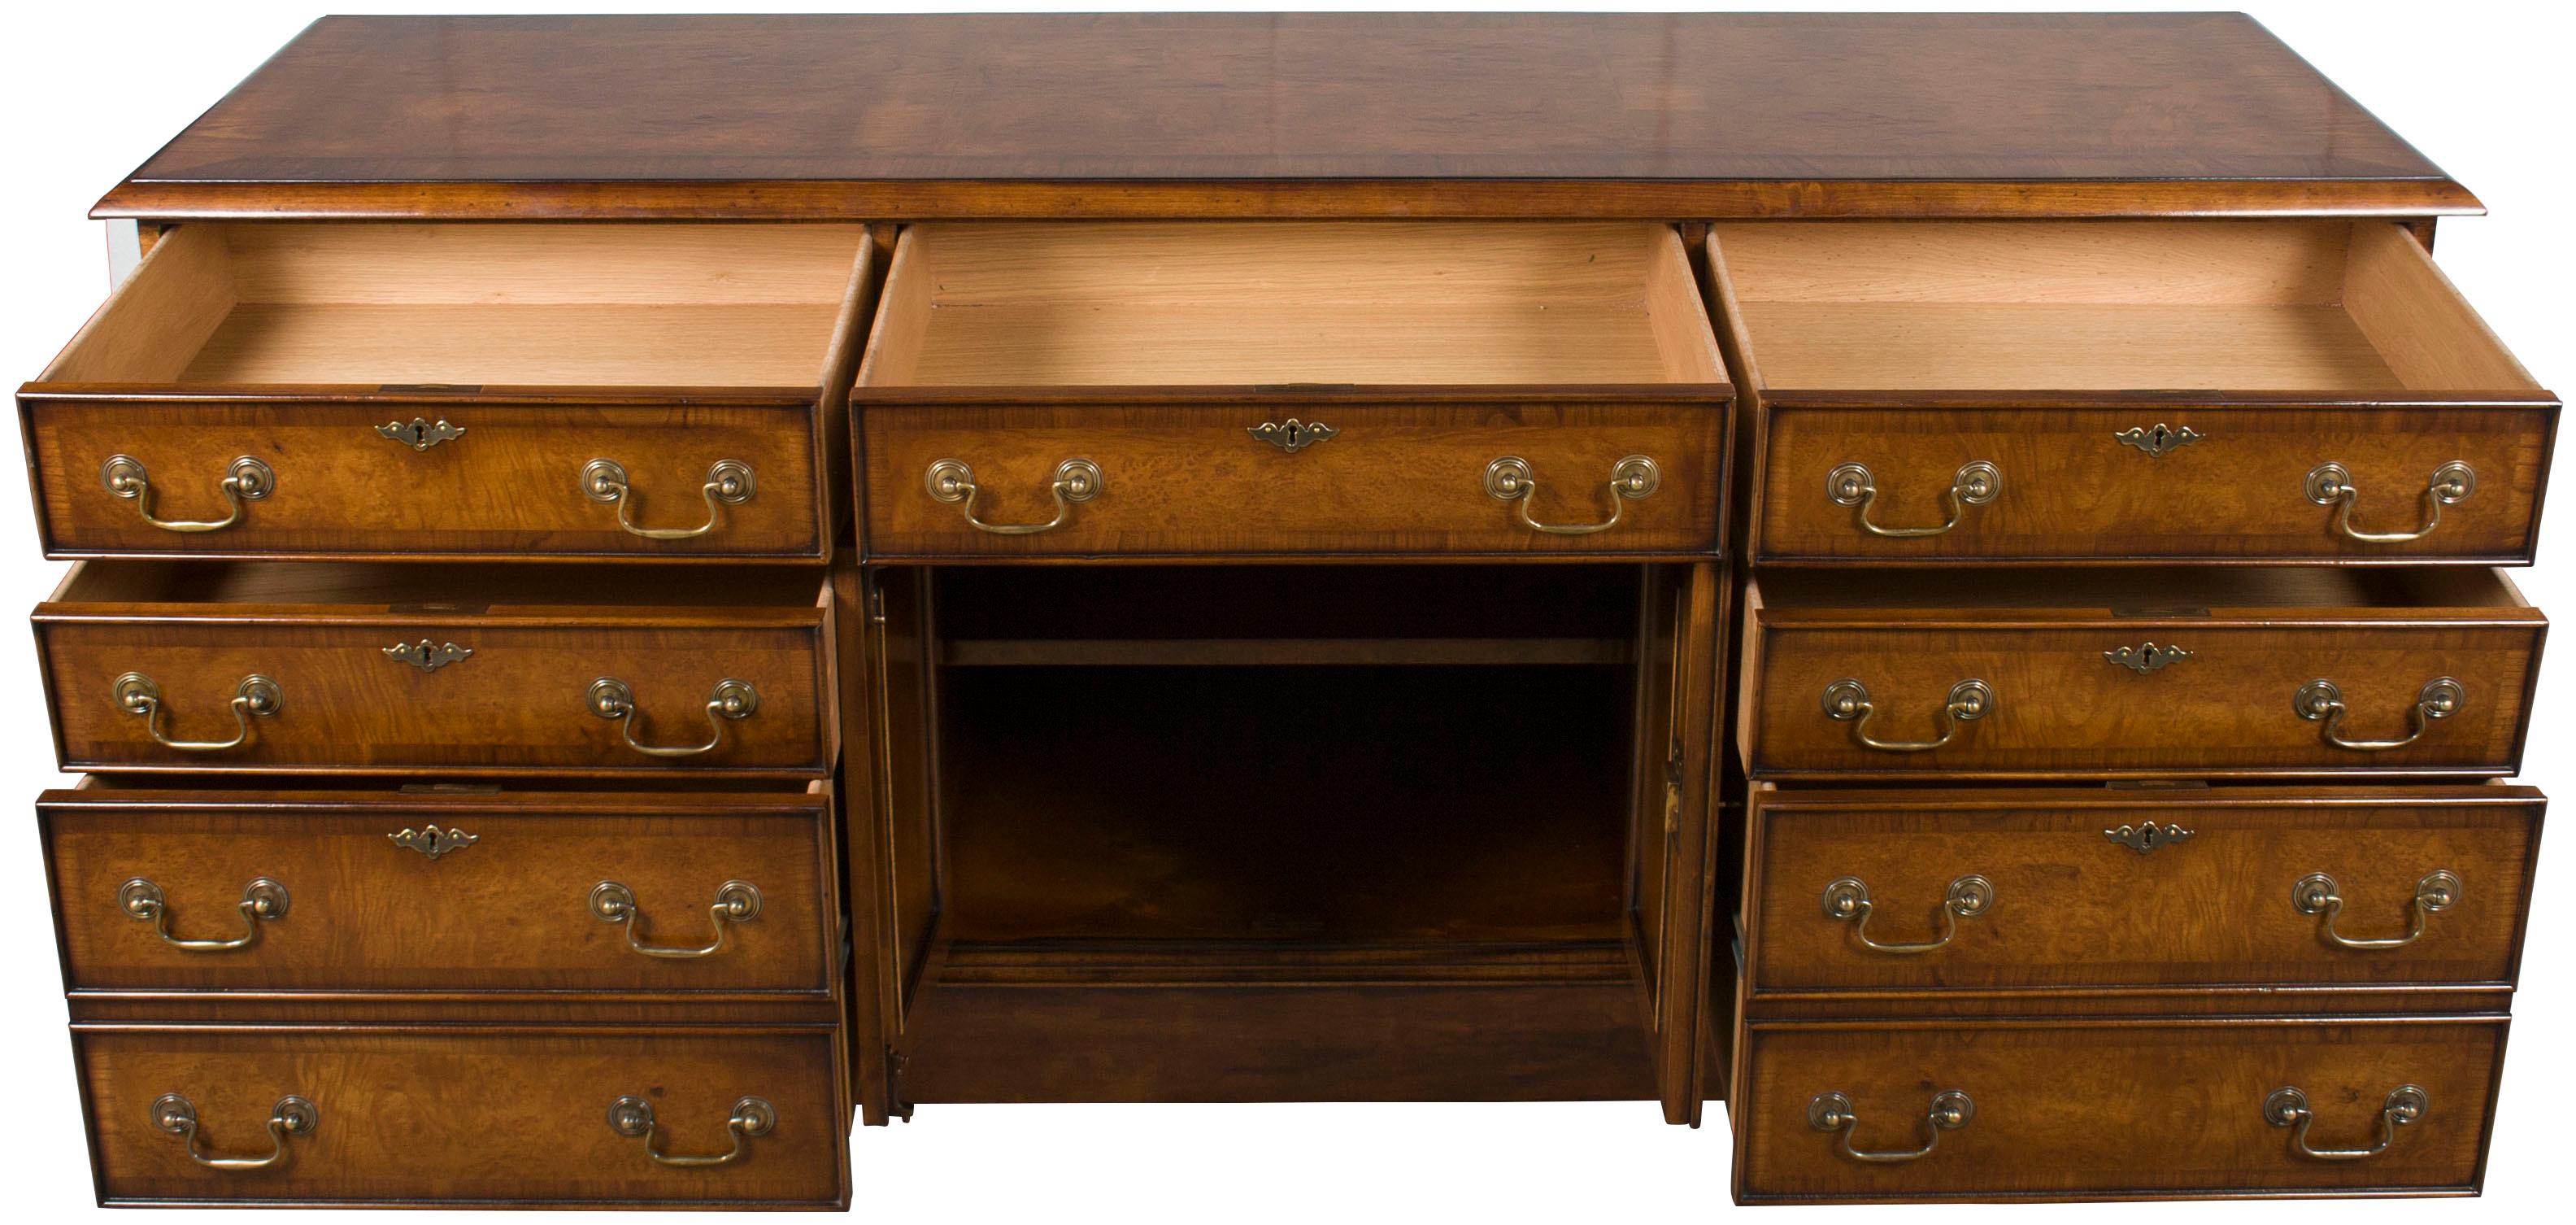 Designed in a classic Georgian style, this beautiful burl walnut credenza offers a glamorous combination of period design and modern functionality. A variety of drawers and a central cabinet contain plenty of storage, while the quality construction